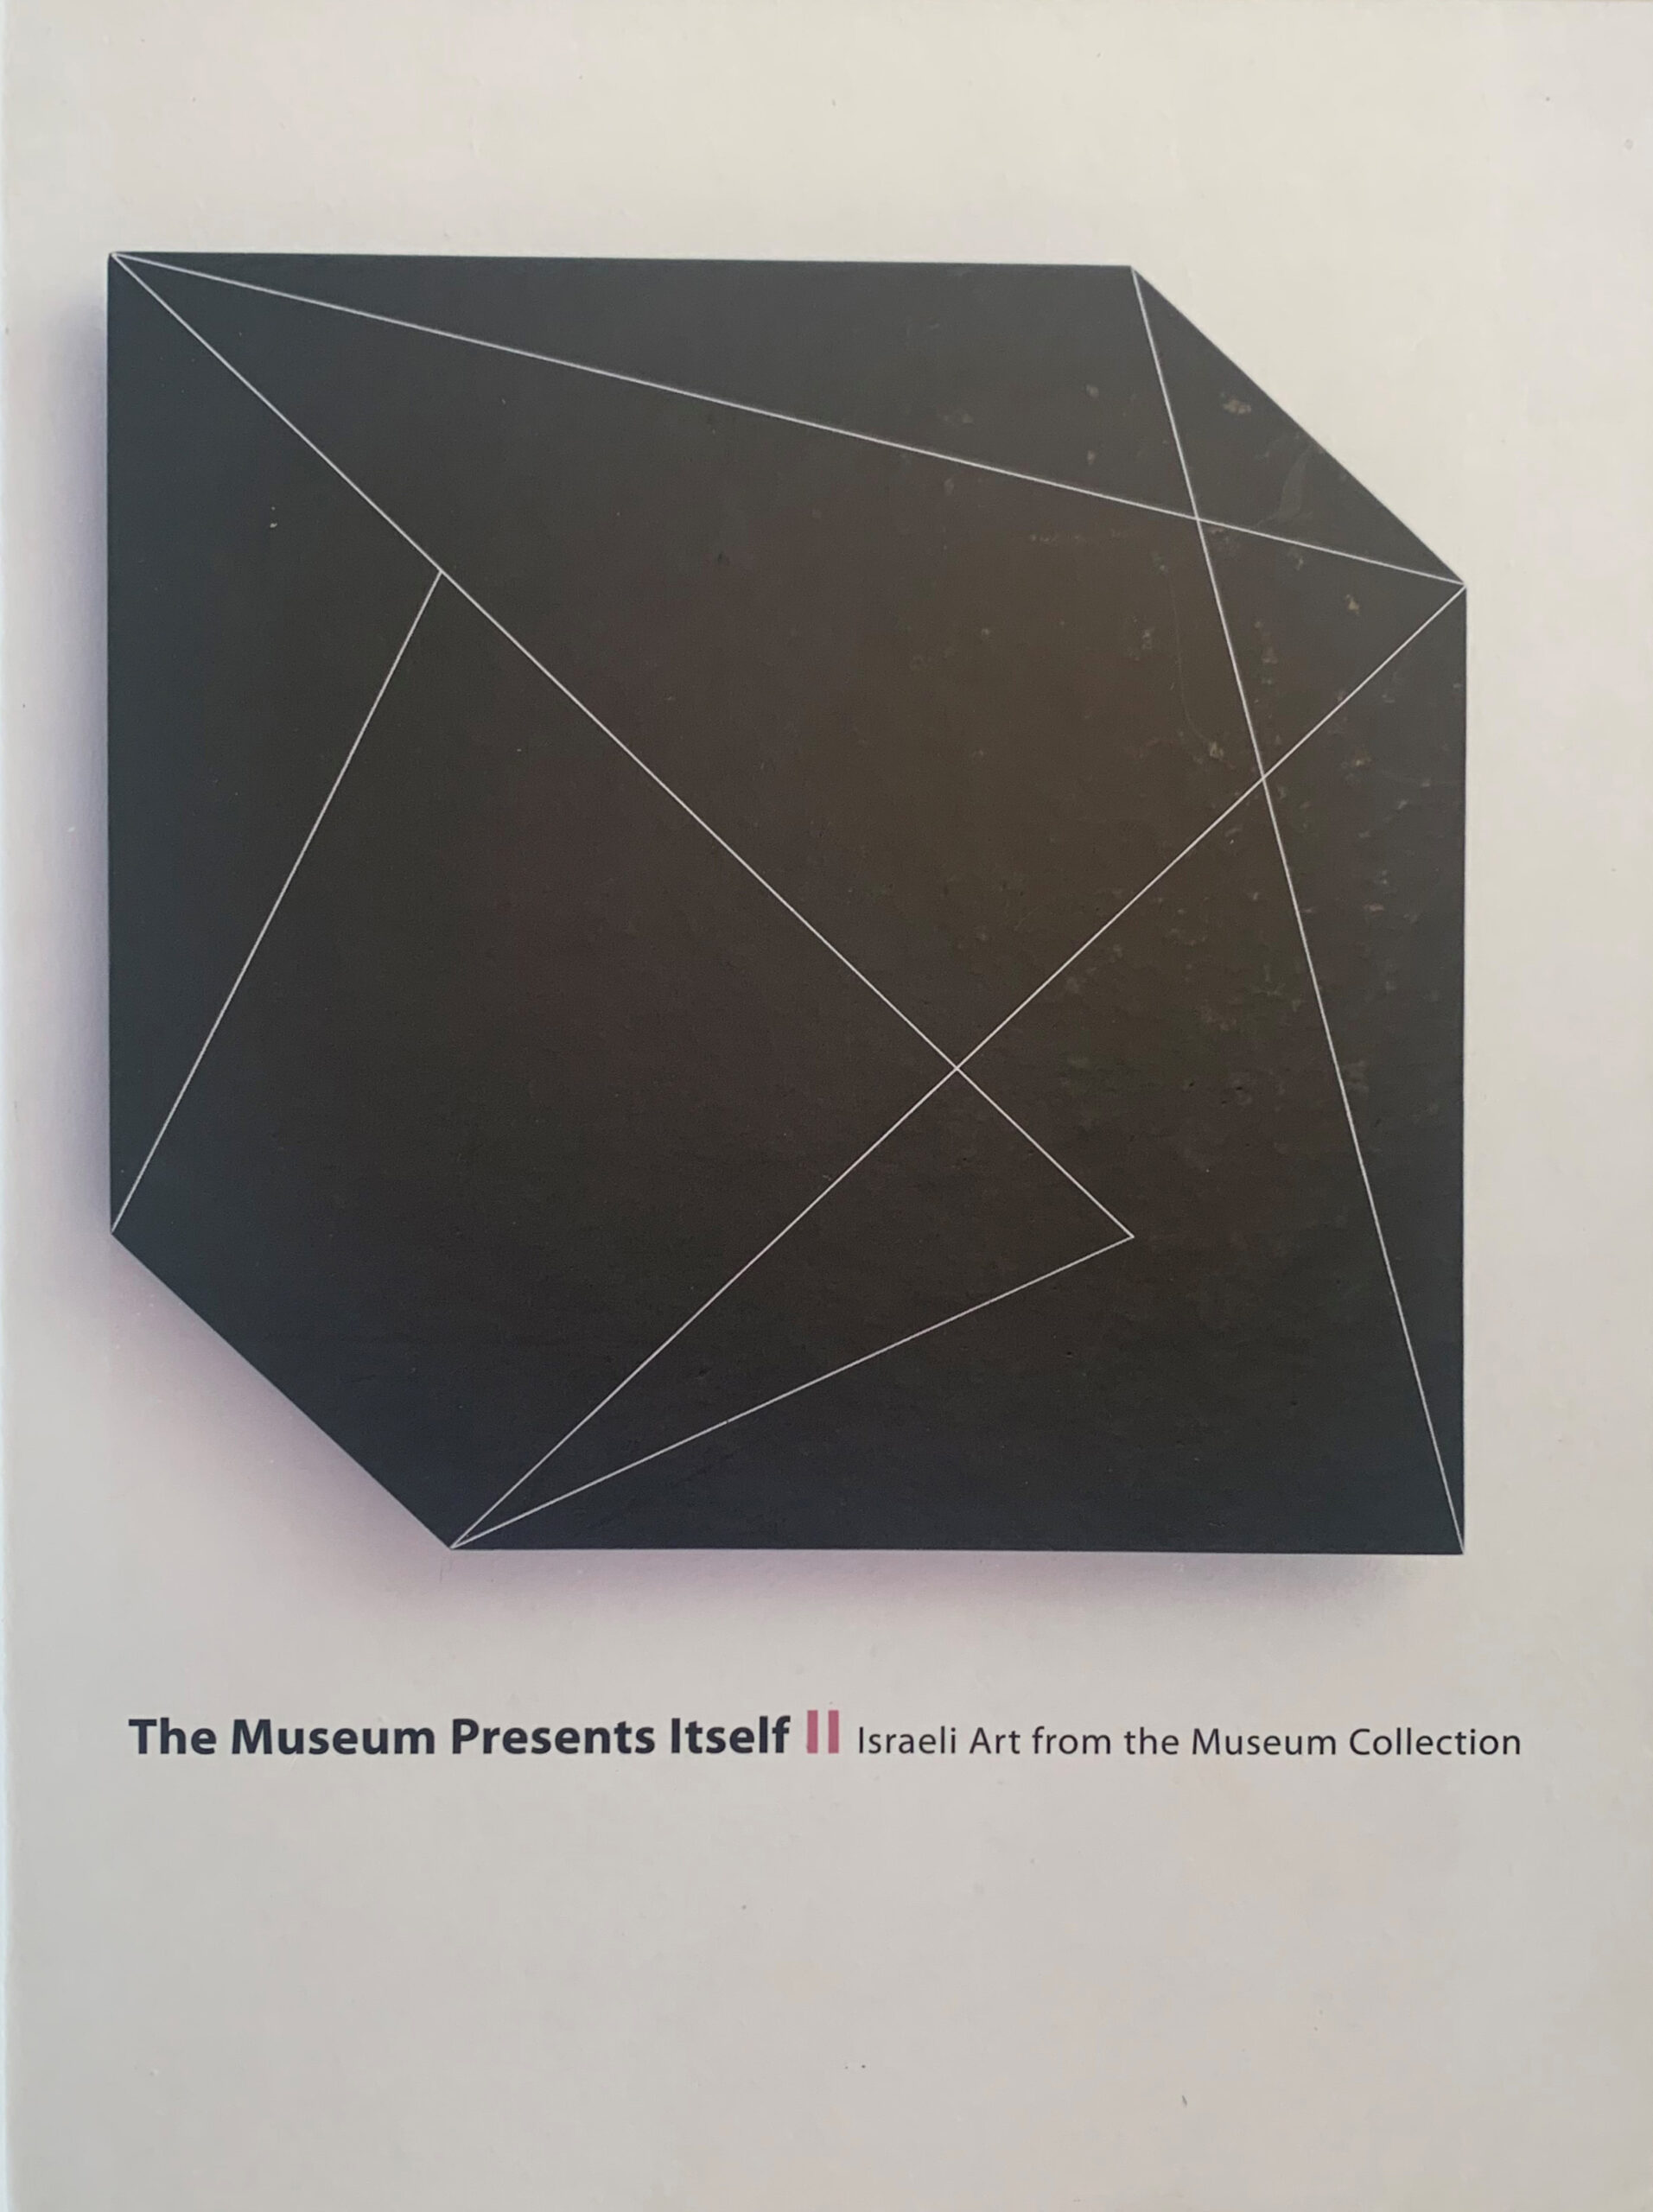 The Museum Presents Itself II: Israeli Art from the Museum Collection